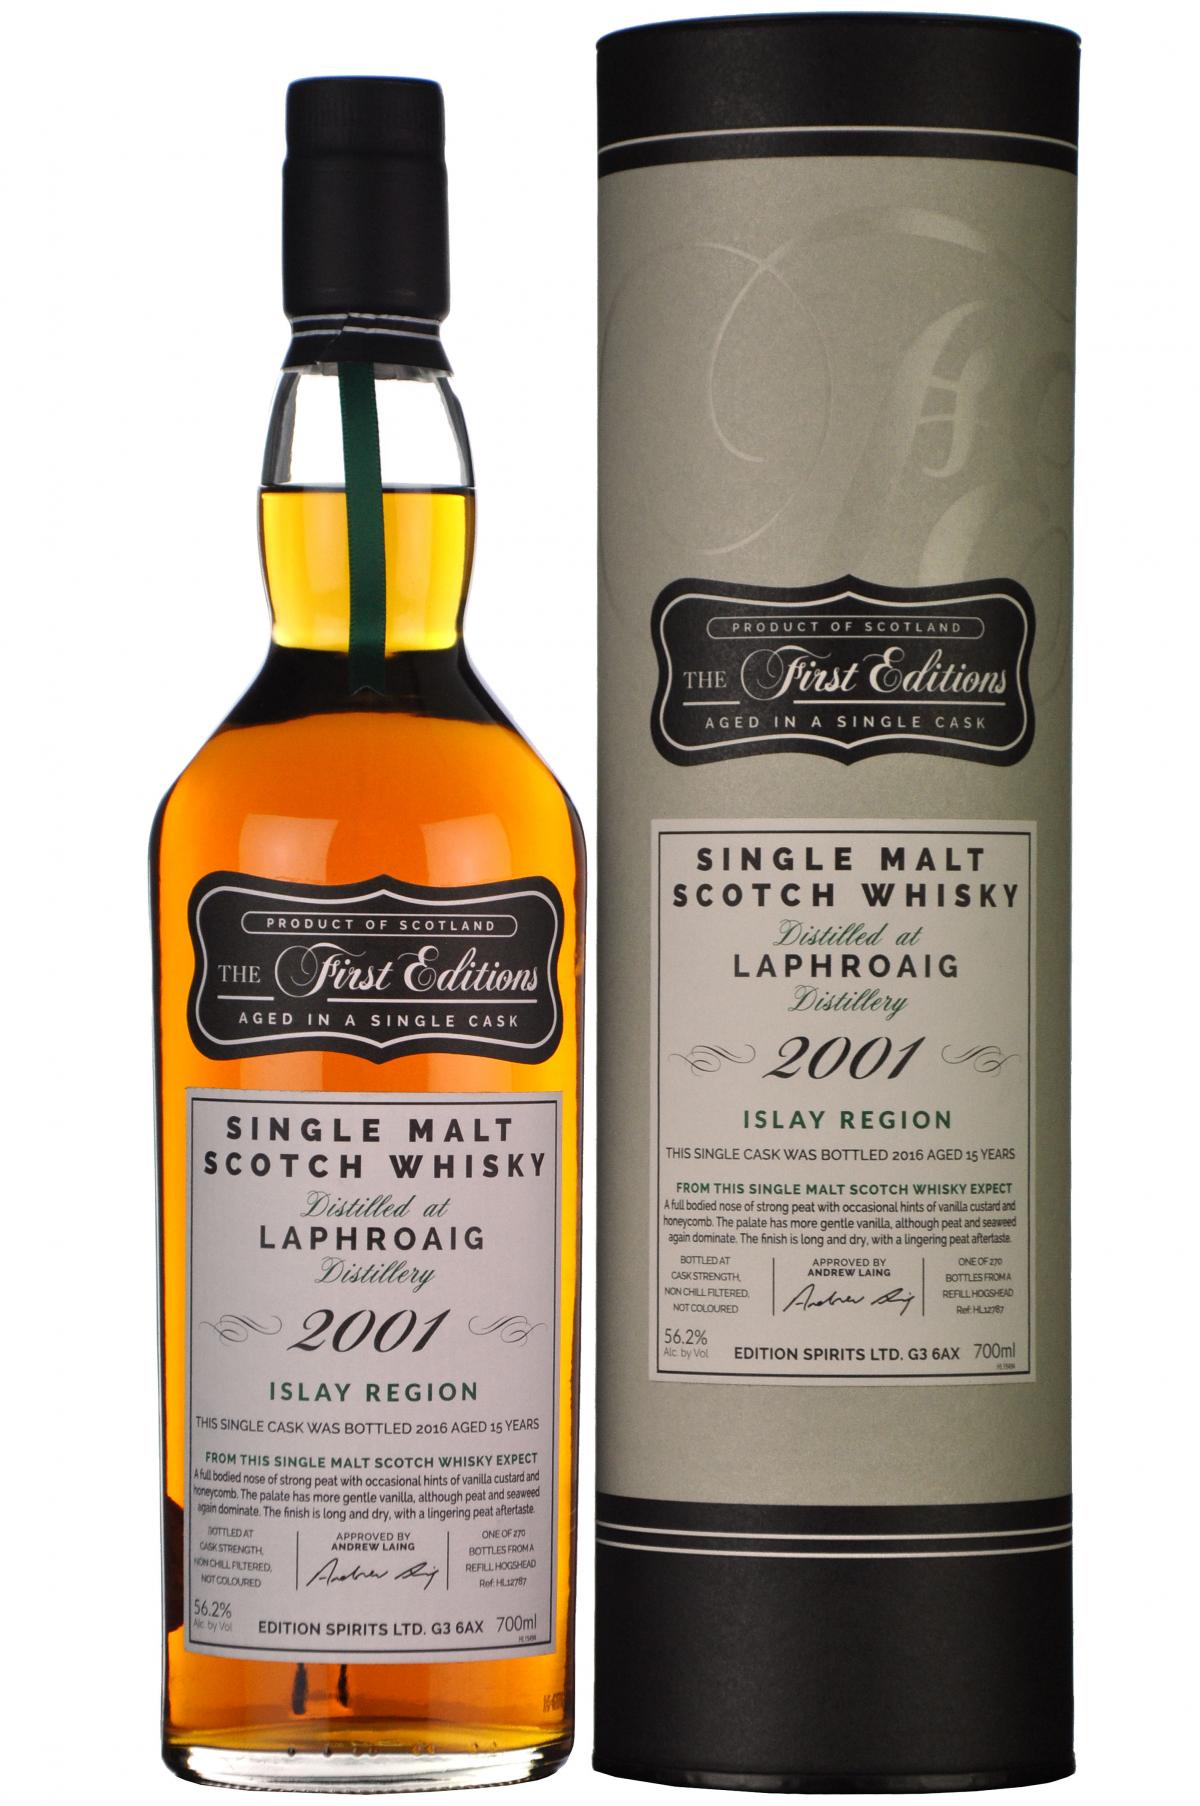 Laphroaig 2001-2016 | 15 Year Old | The First Editions